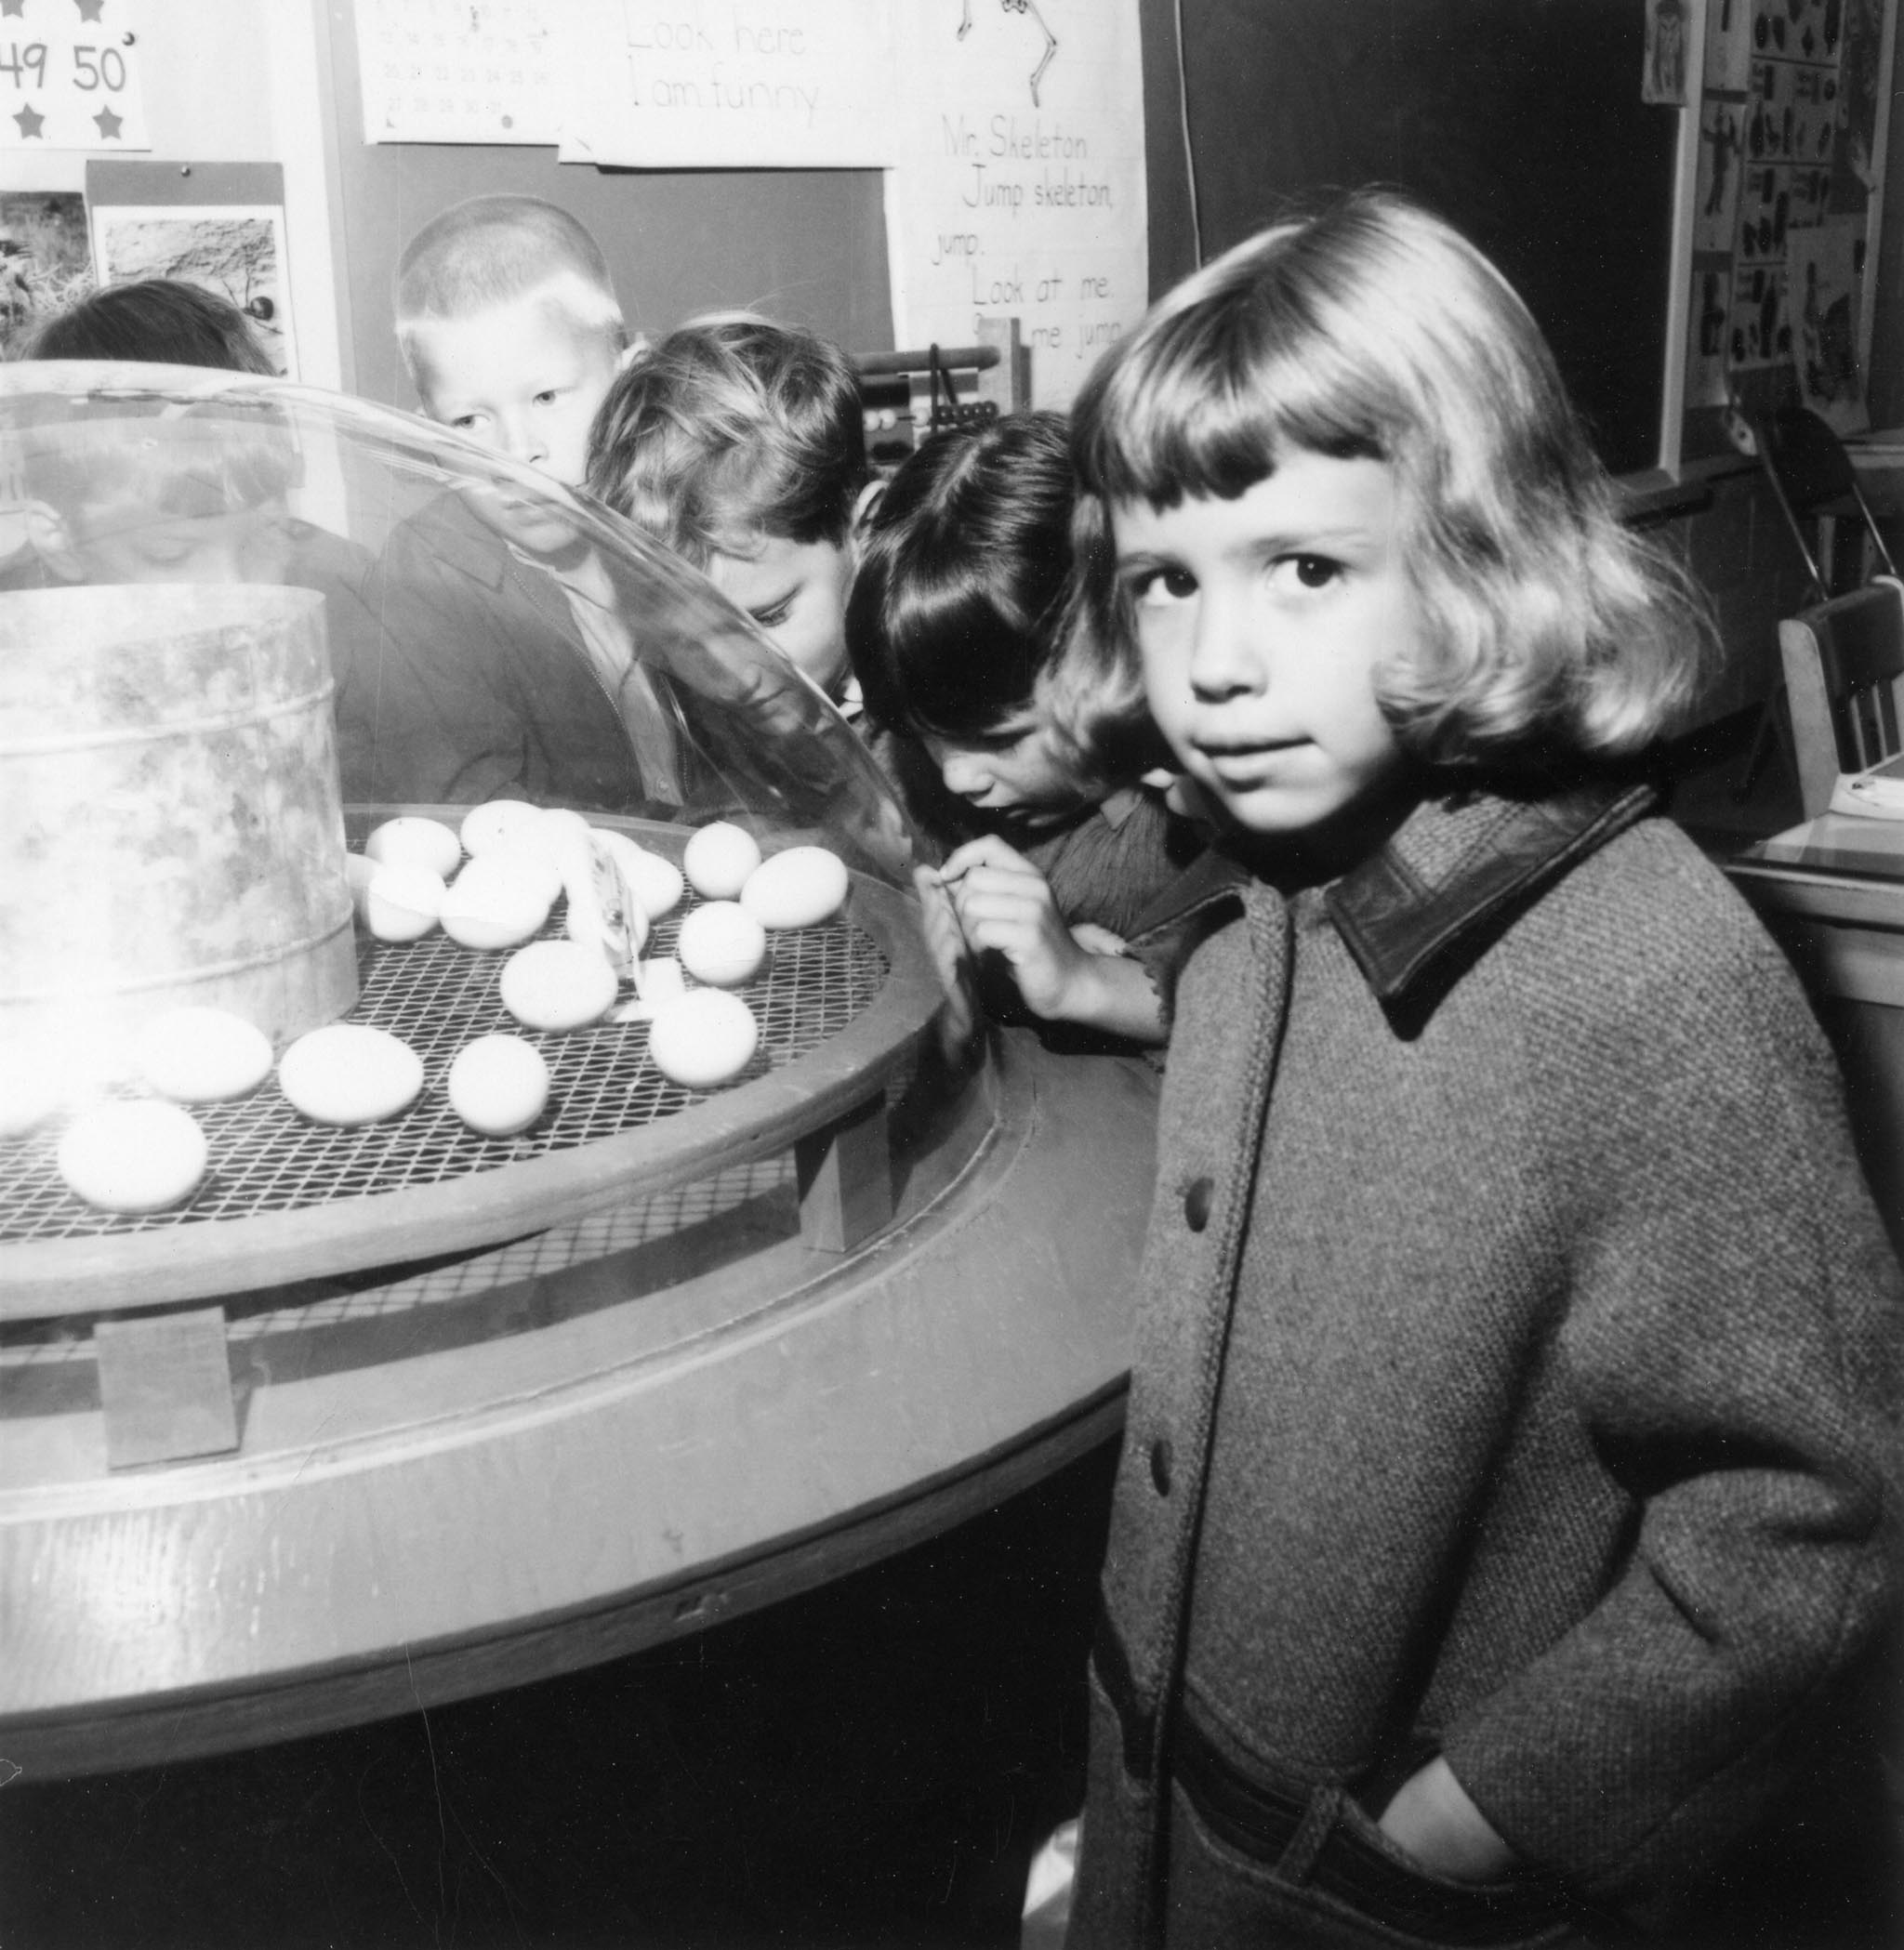 In 1968, one of the top commercial attractions of the State Fair of Oklahoma was the “see-through” incubator in the Farm Bureau exhibit. Thousands of people came through the display to get their first glimpse of a chick hatching. In the following months, the incubator was taken to numerous schools to educate children about the egg-hatching process.